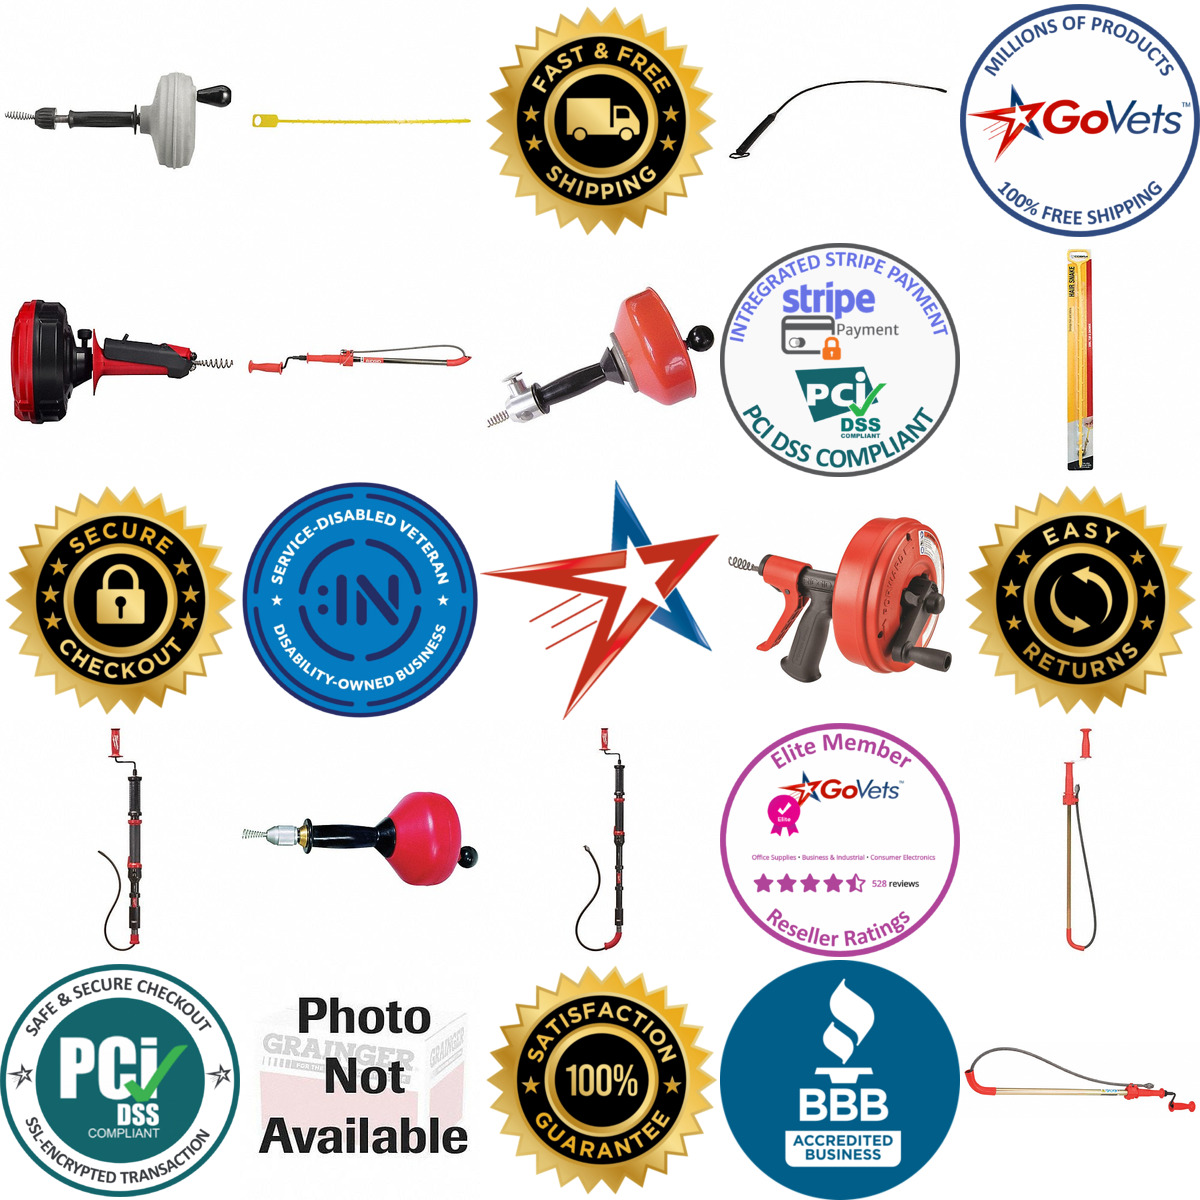 A selection of Manual Drain Cleaners products on GoVets